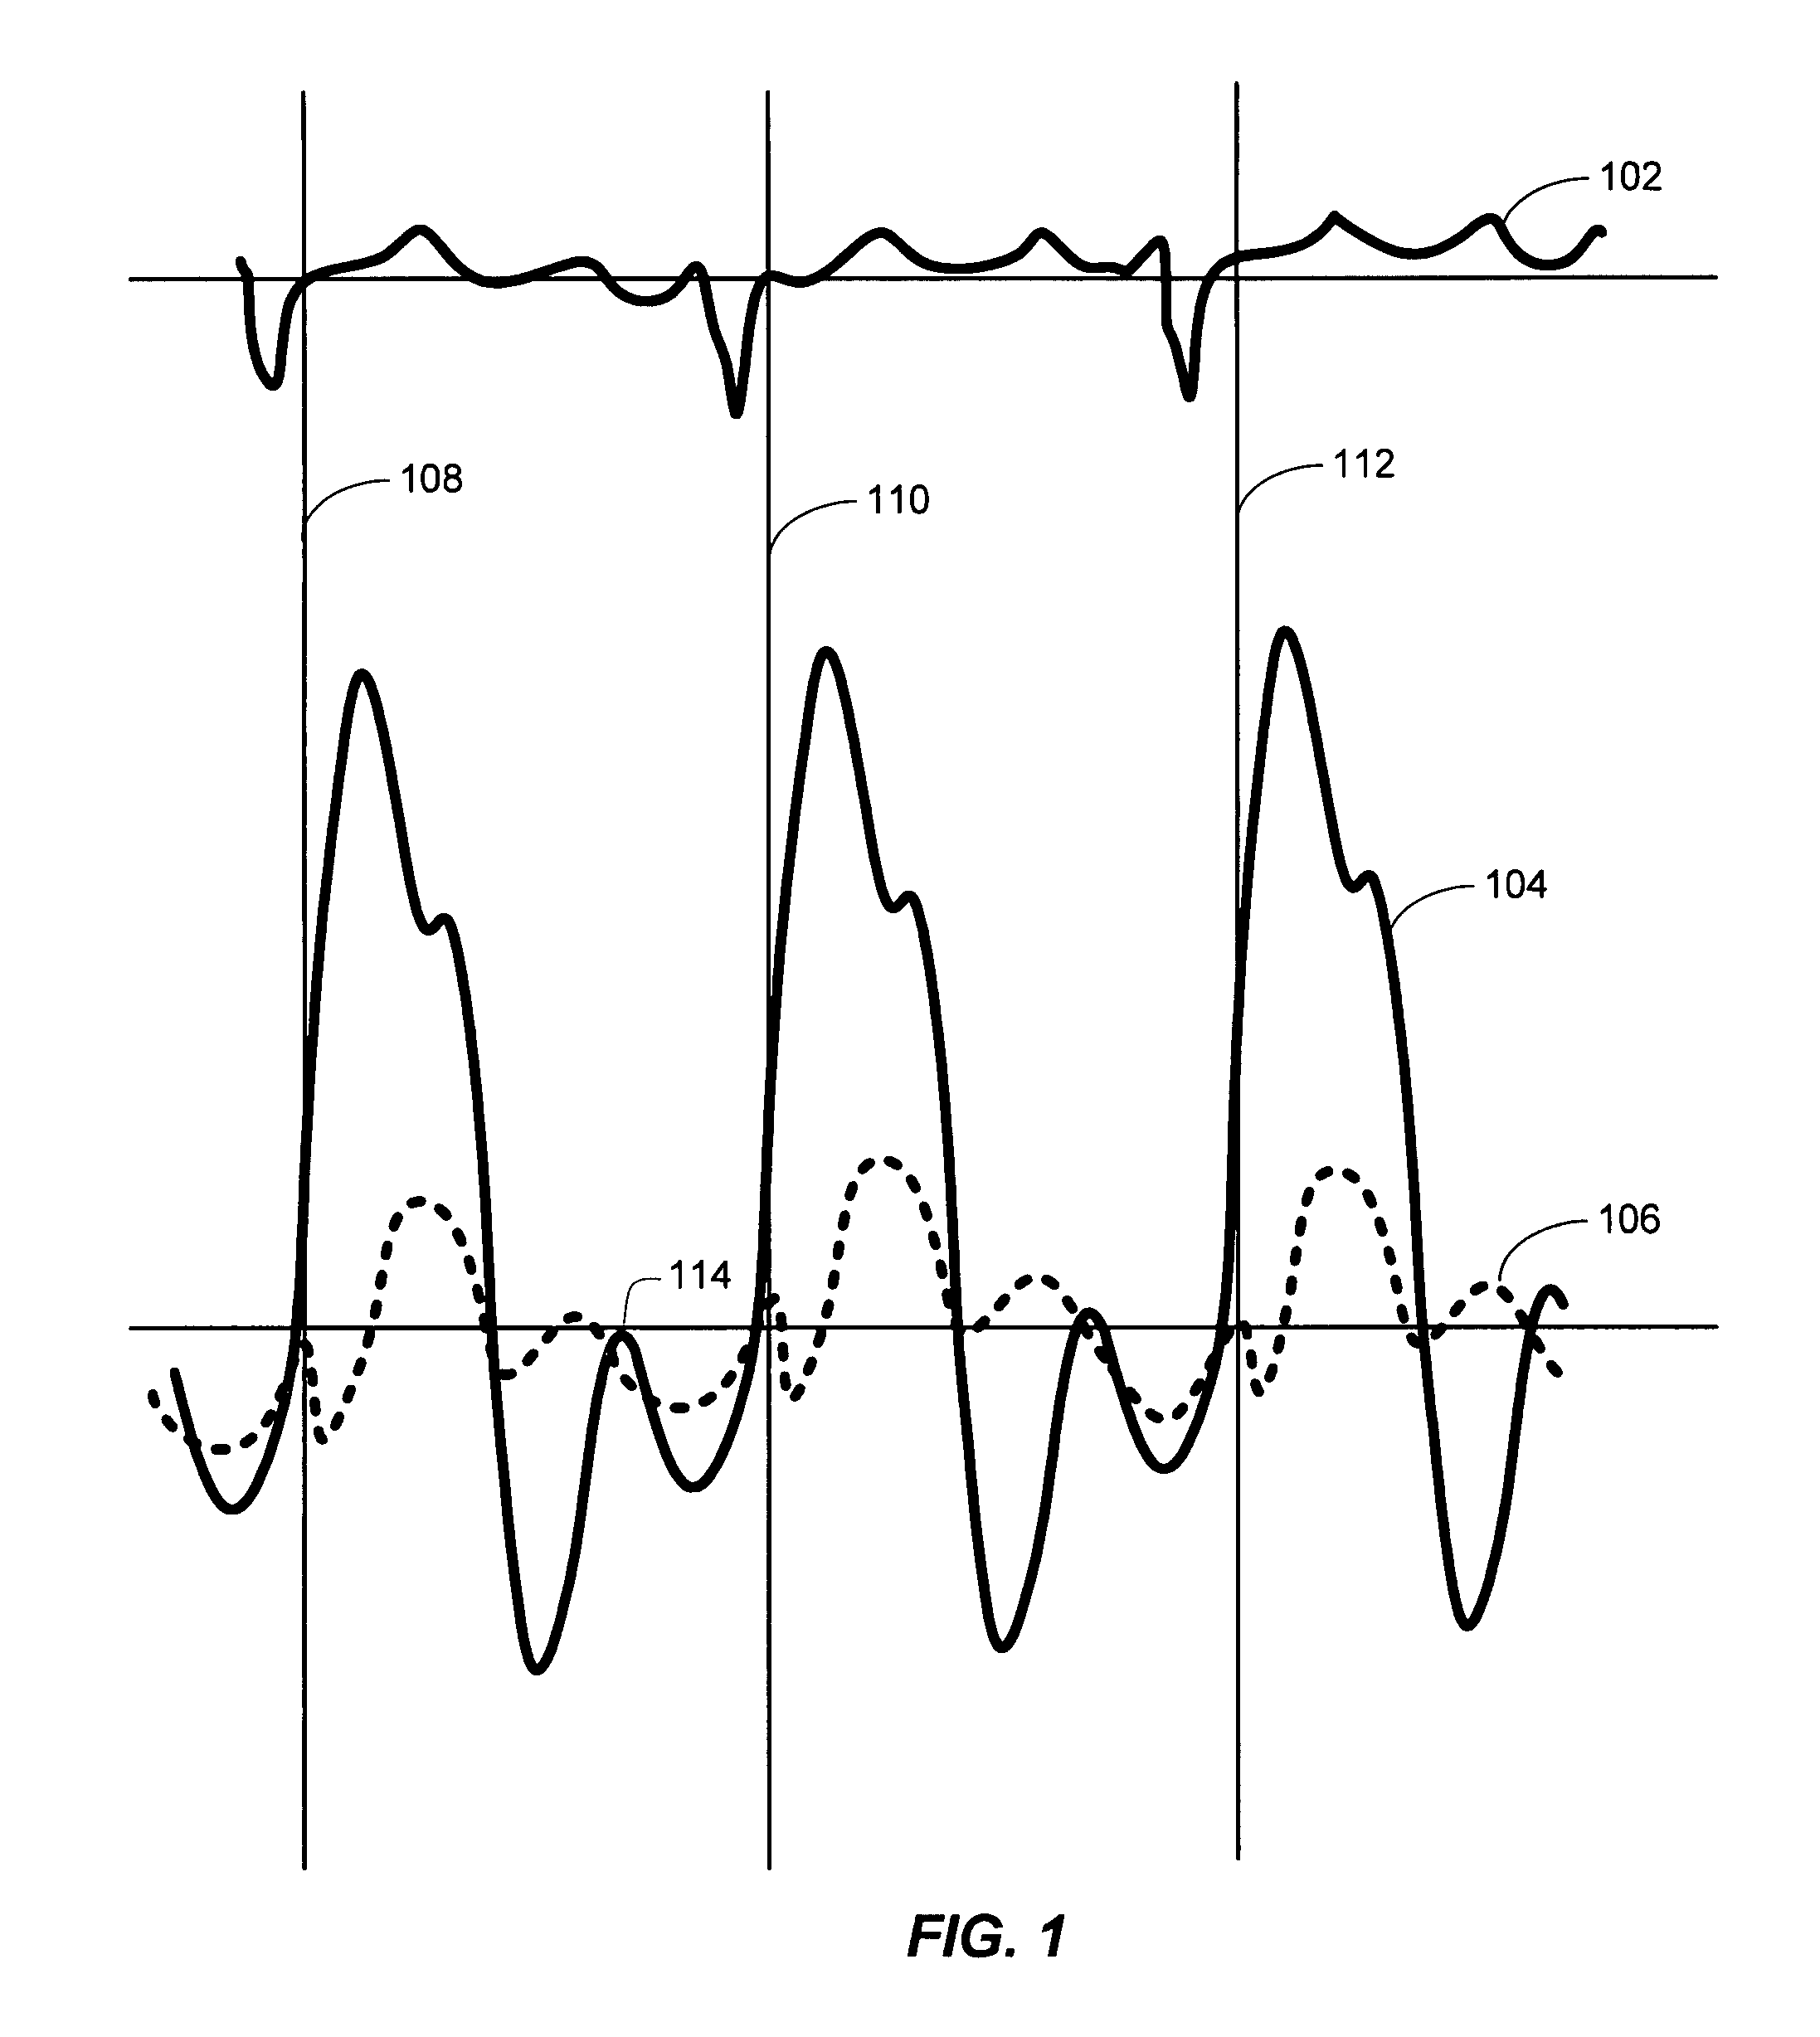 Method, apparatus, and system to optimize cardiac preload based on measured pulmonary artery pressure